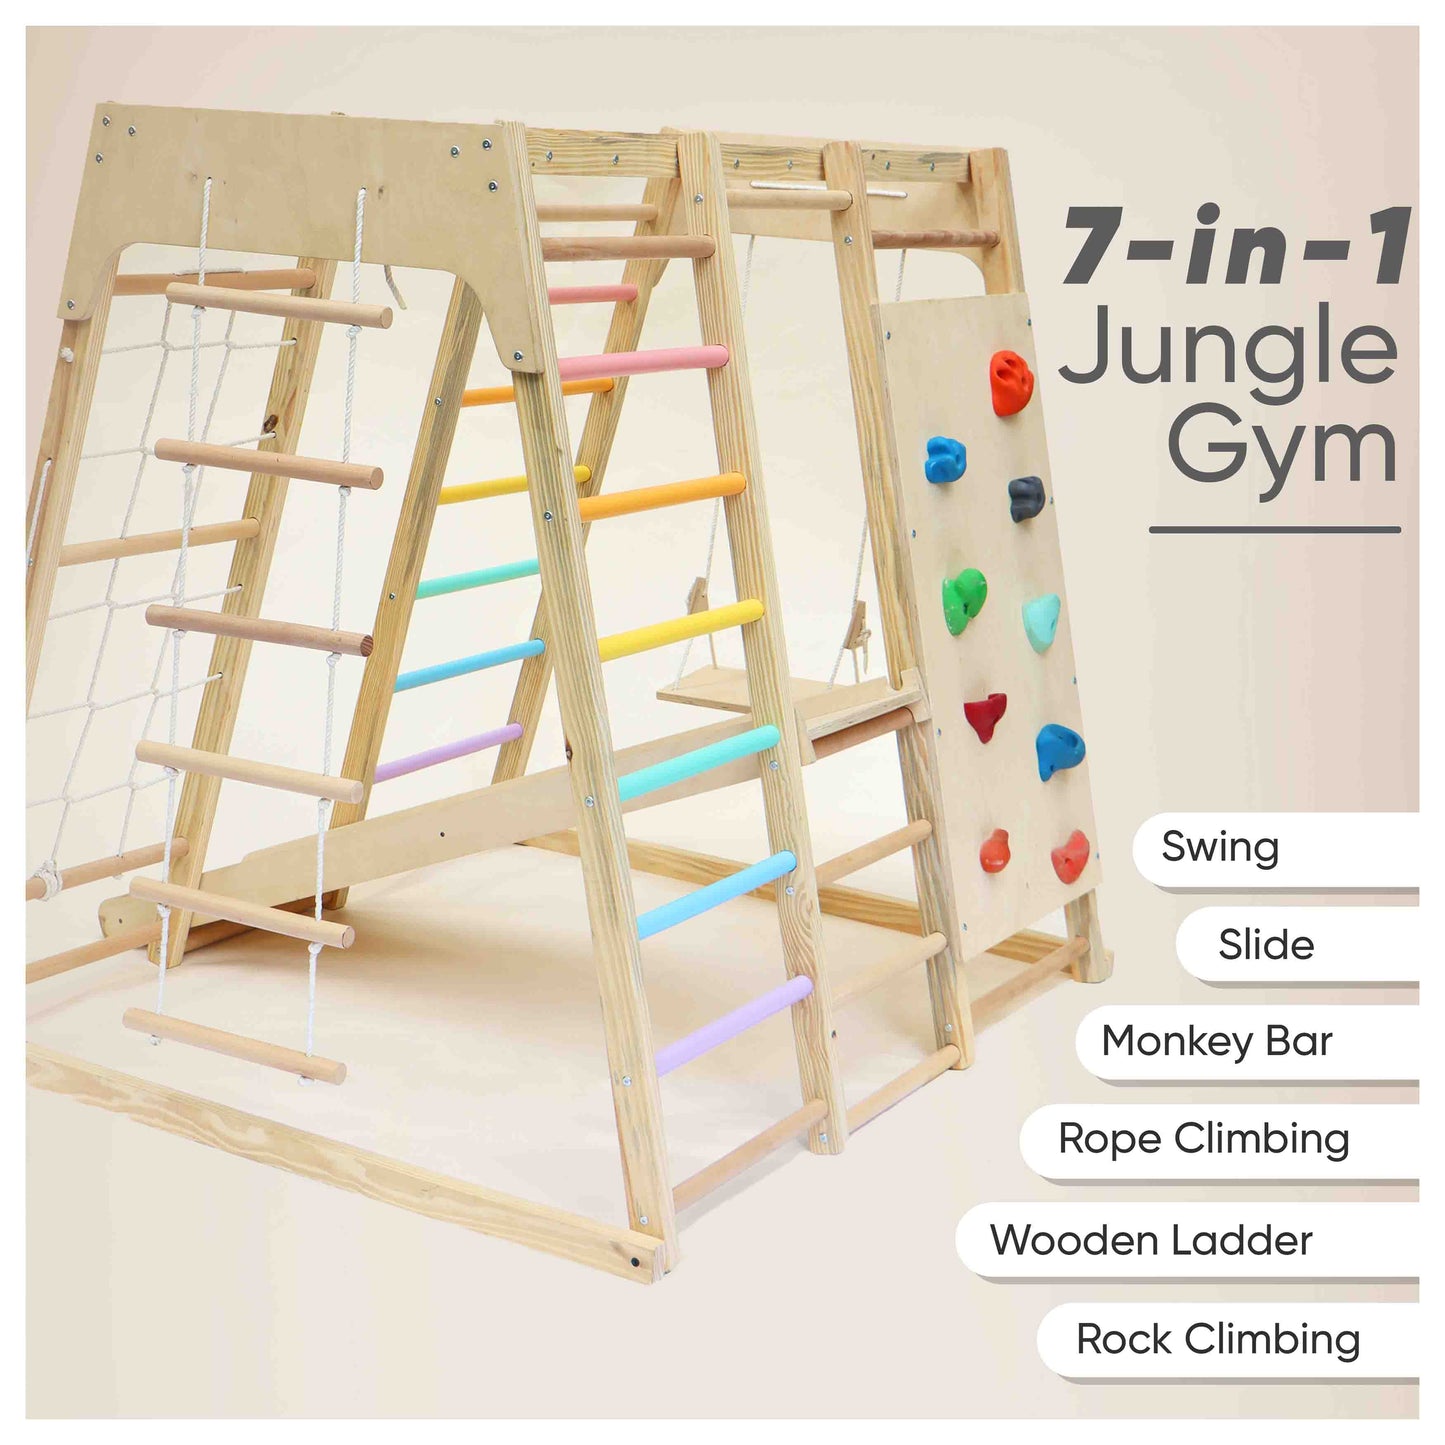 7-in-1 Jungle gym